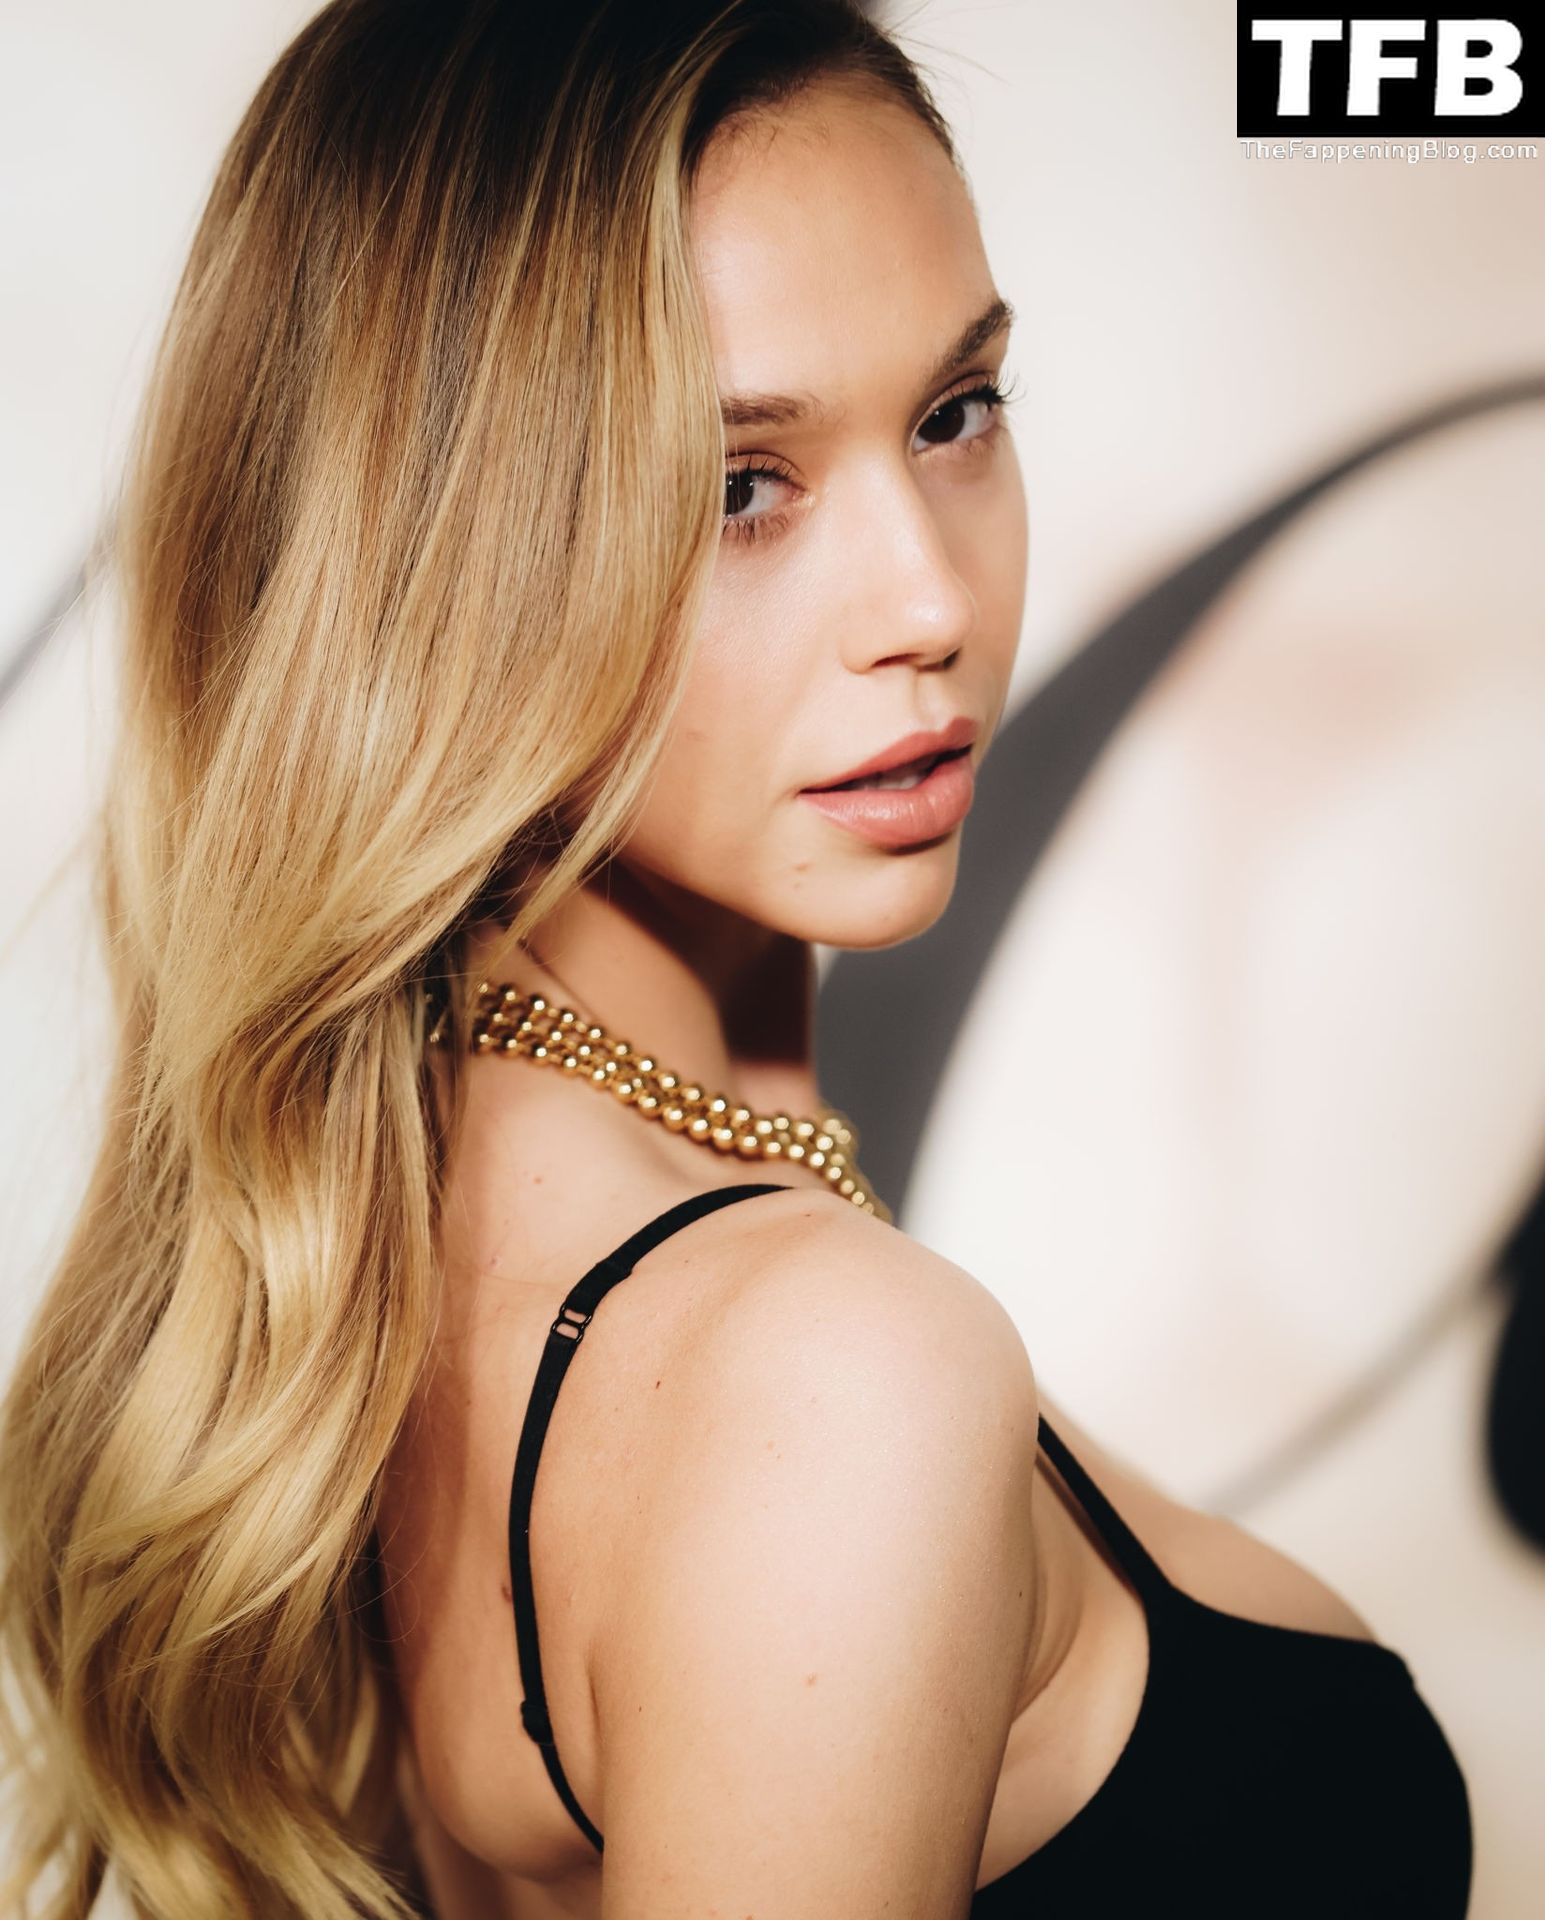 Alexis-Ren-Sexy-The-Fappening-Blog-5.jpg